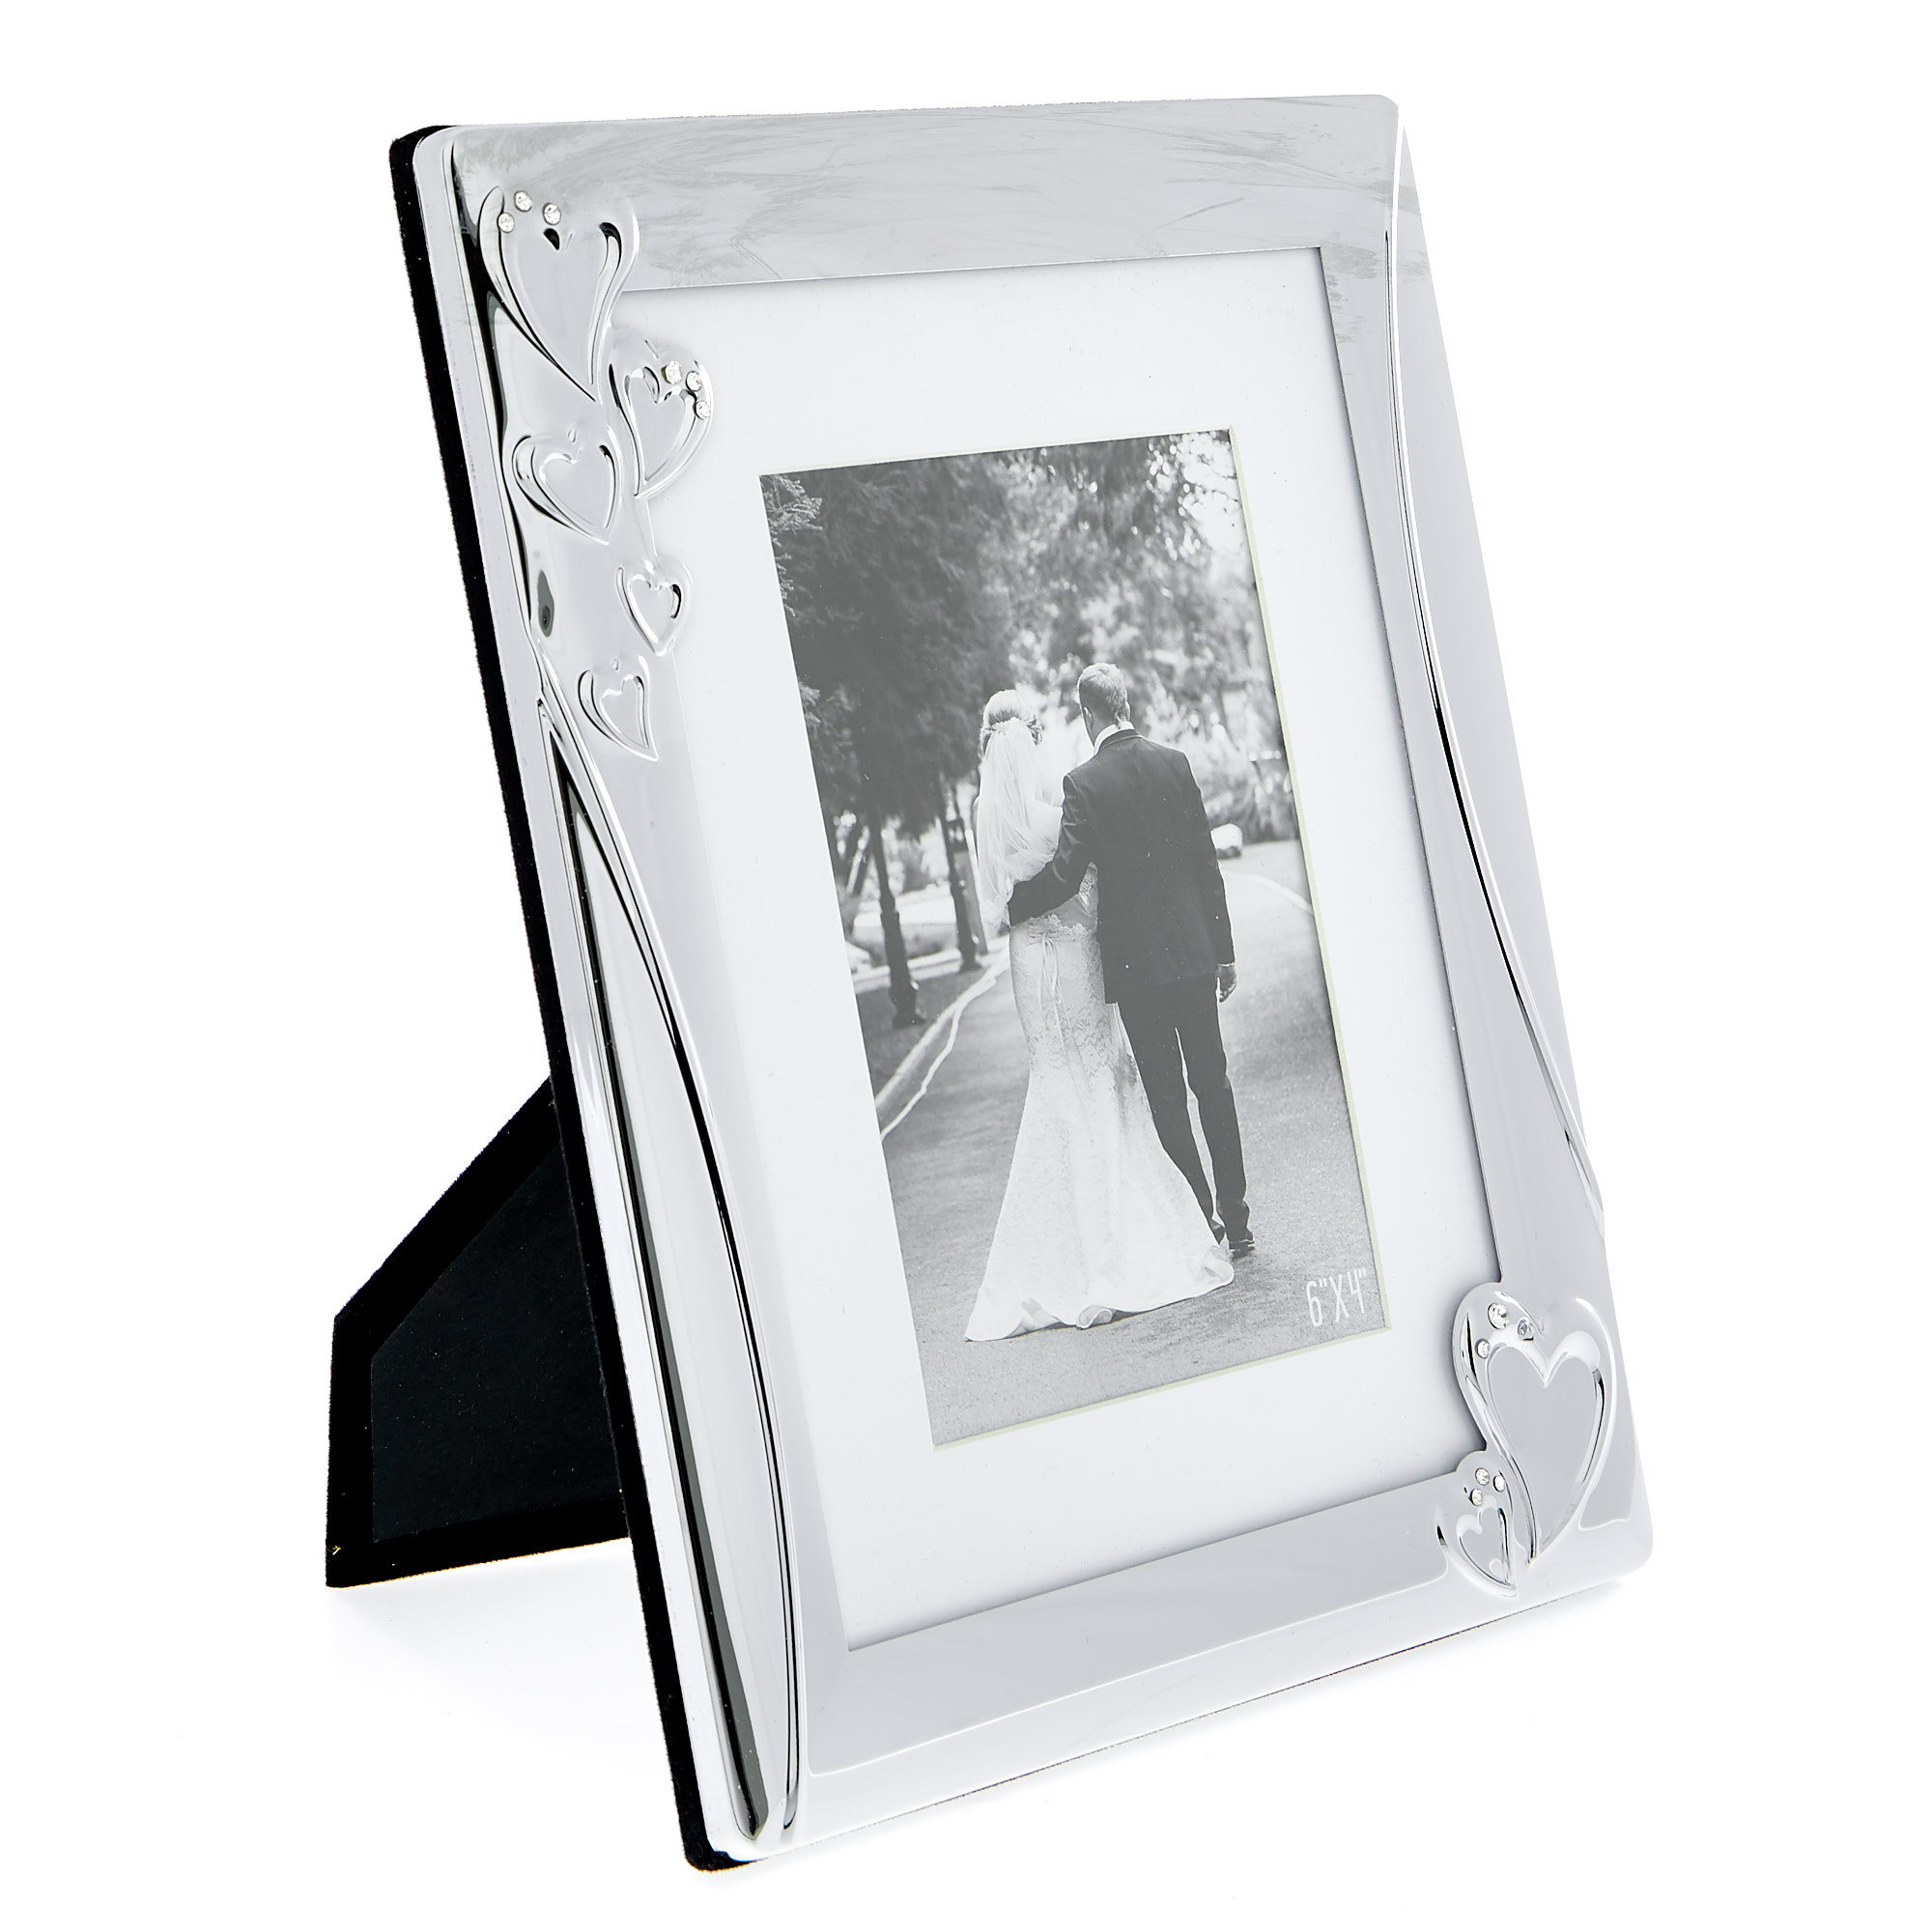 Happily Ever After Silver Love Hearts Photo Frame